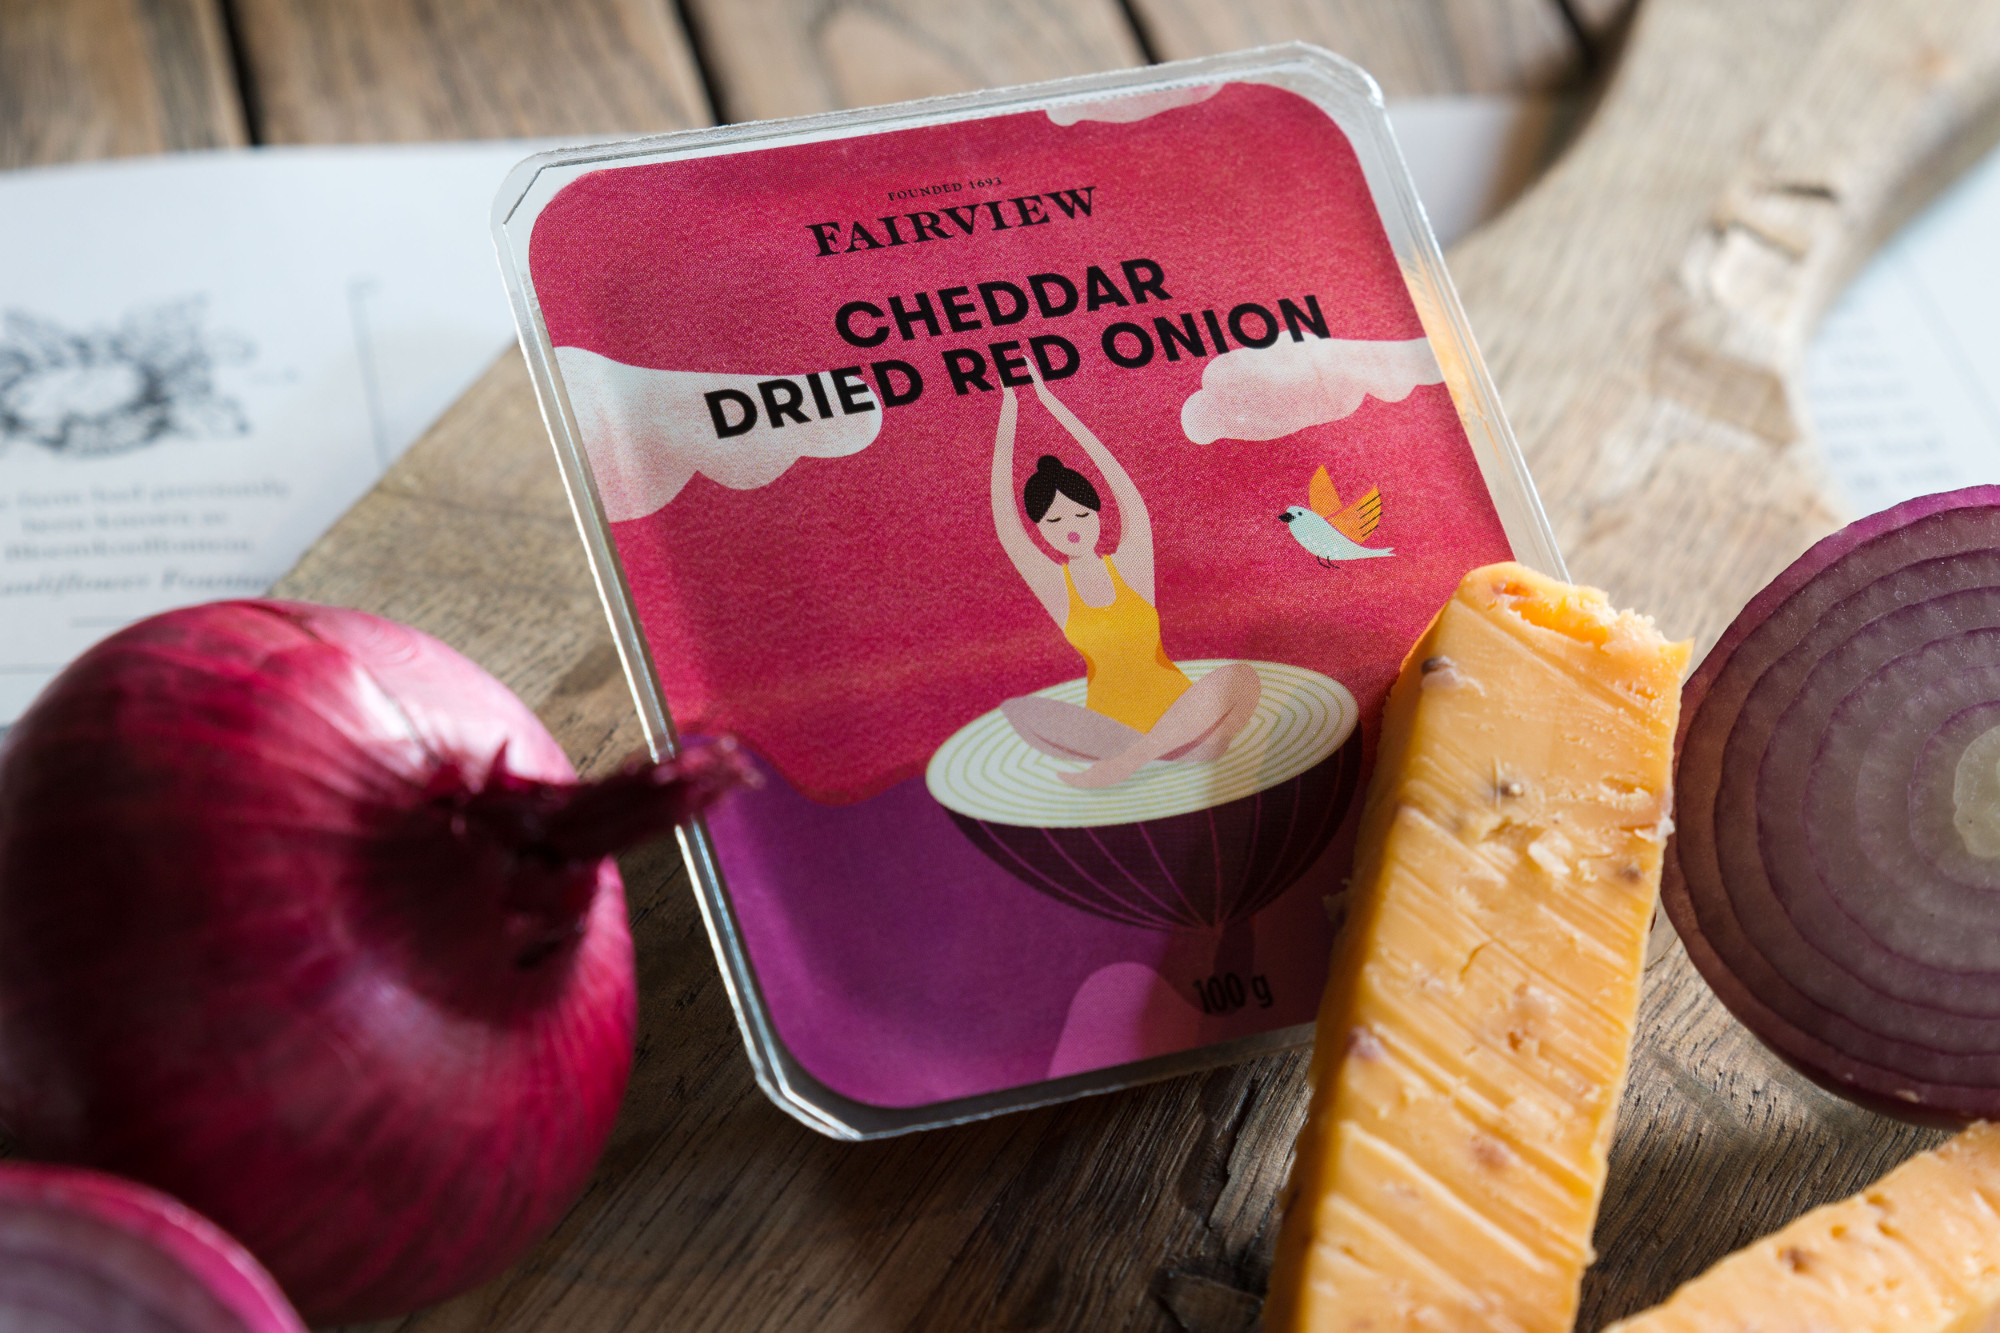 Fairview Dried Red Onion Cheddar